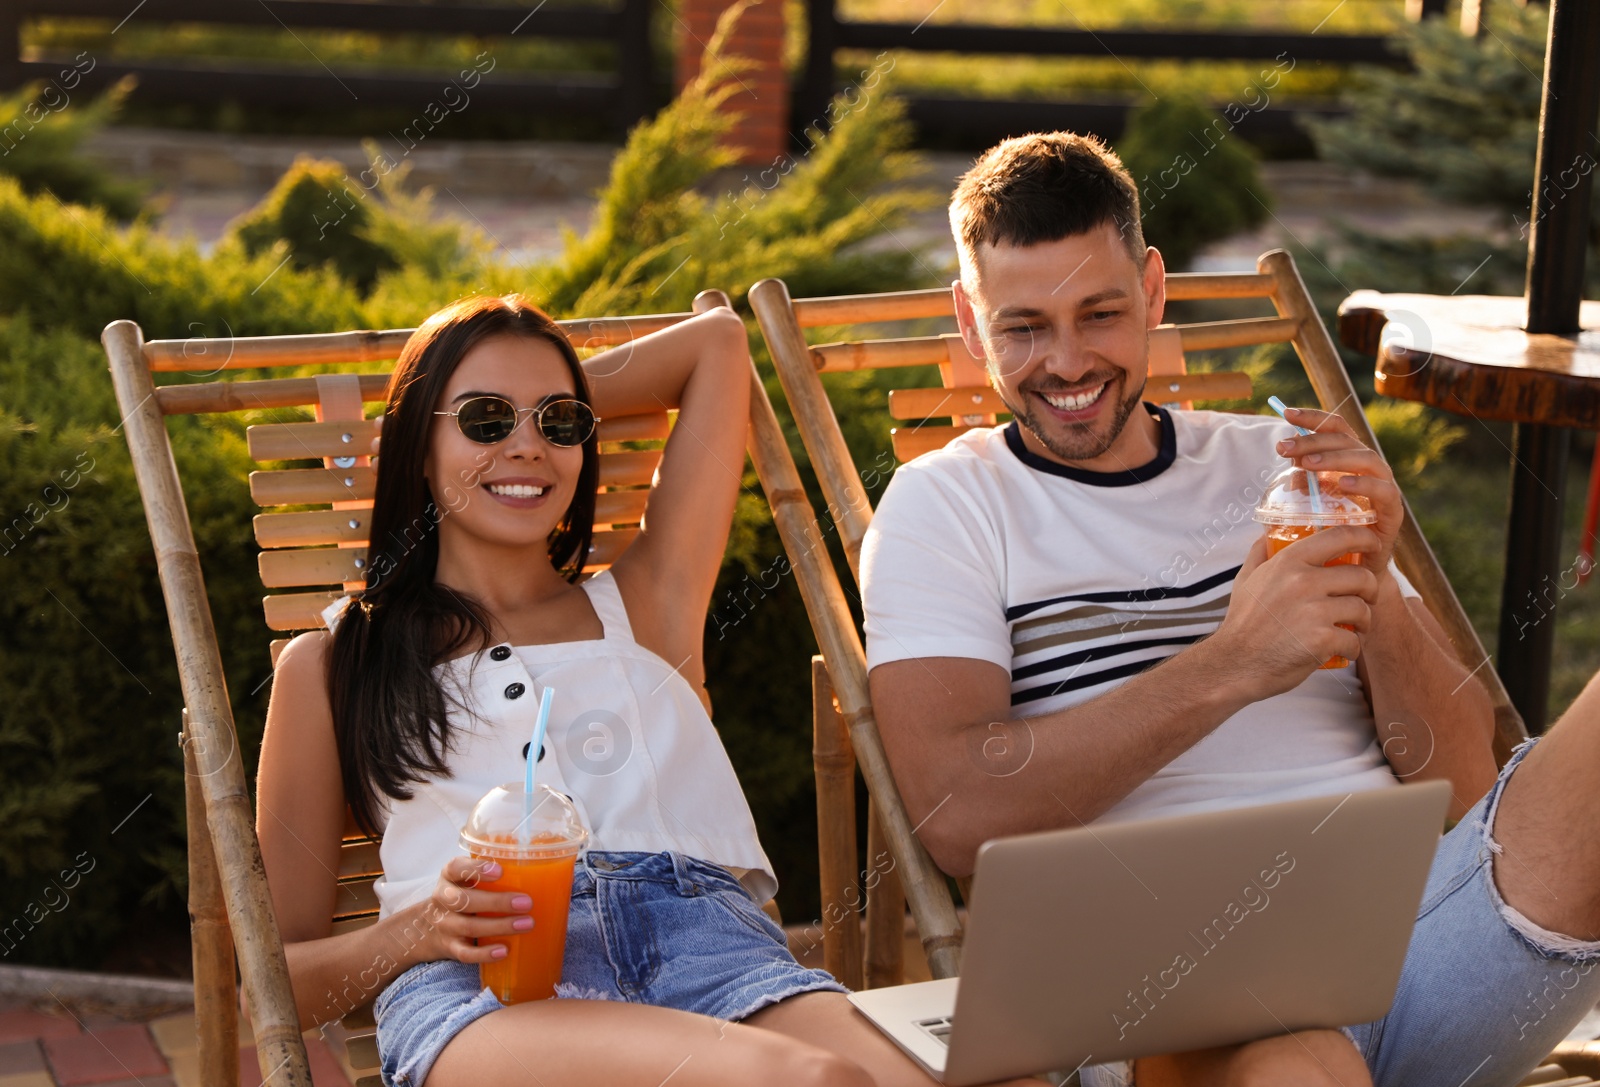 Image of Happy couple with laptop resting together outdoors